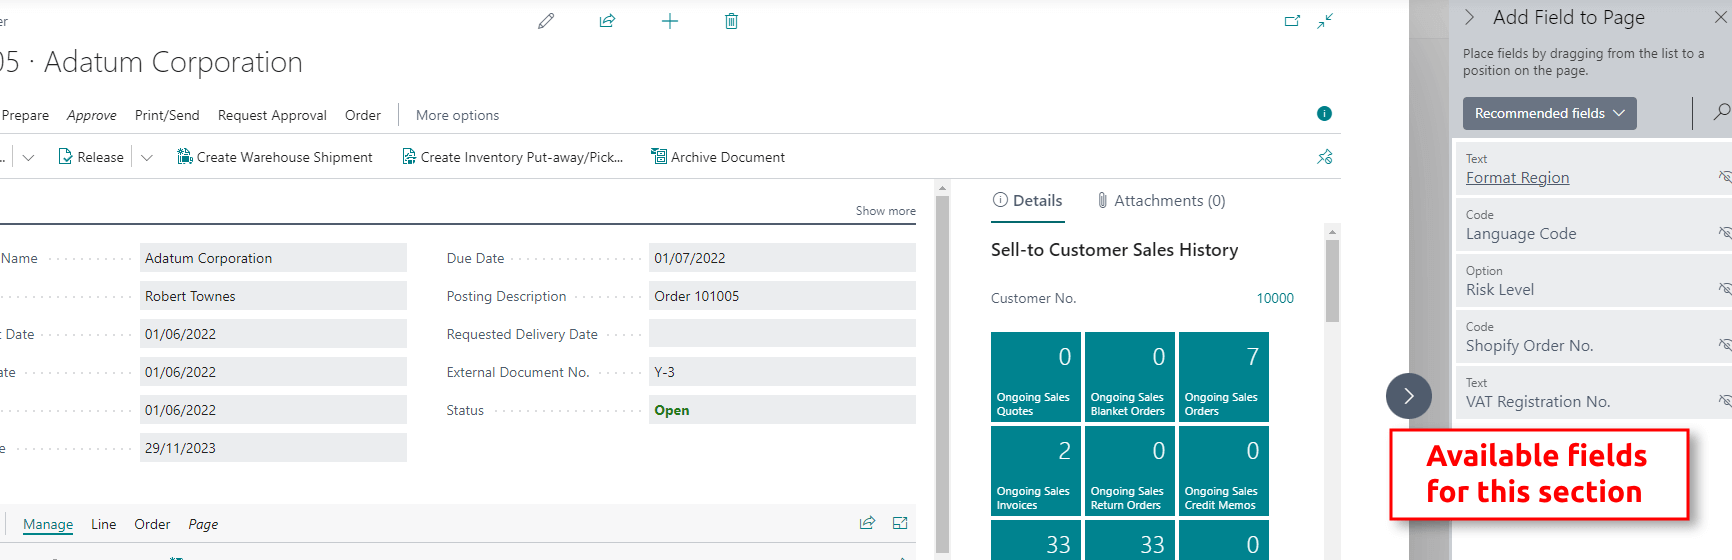 Add fields - card page in Business Central